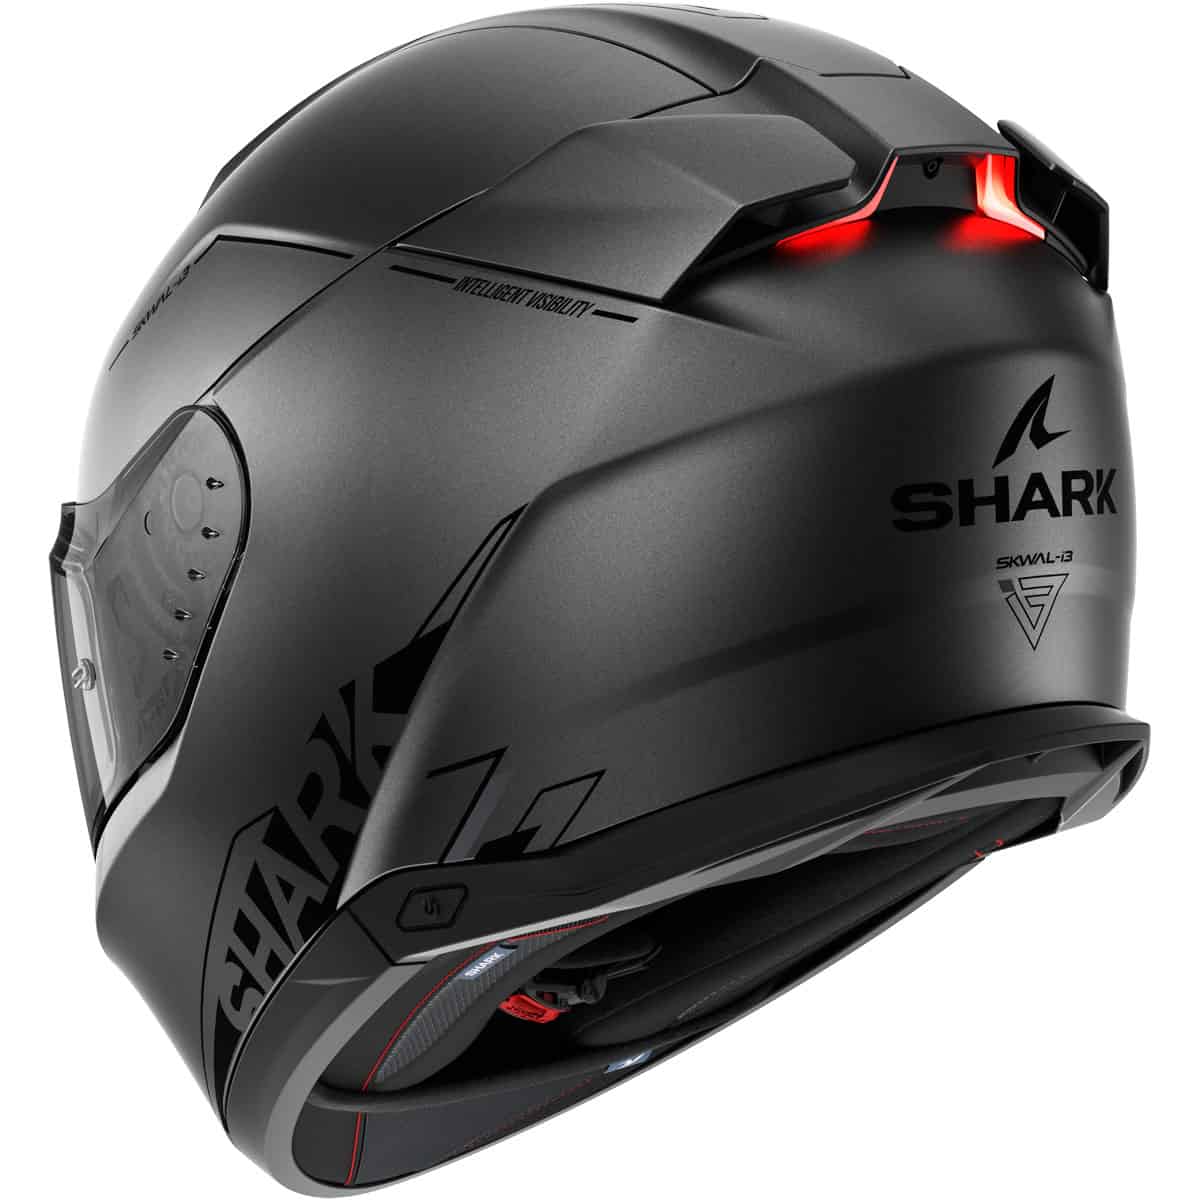 The Shark Skwal i3 helmet is the world's 1st helmet with integrated brake lights. Discover the cutting-edge Shark Skwal i3 helmet: an innovative full face design integrating LED lights that flash rear brake lights on braking, without cables or Bluetooth!  3